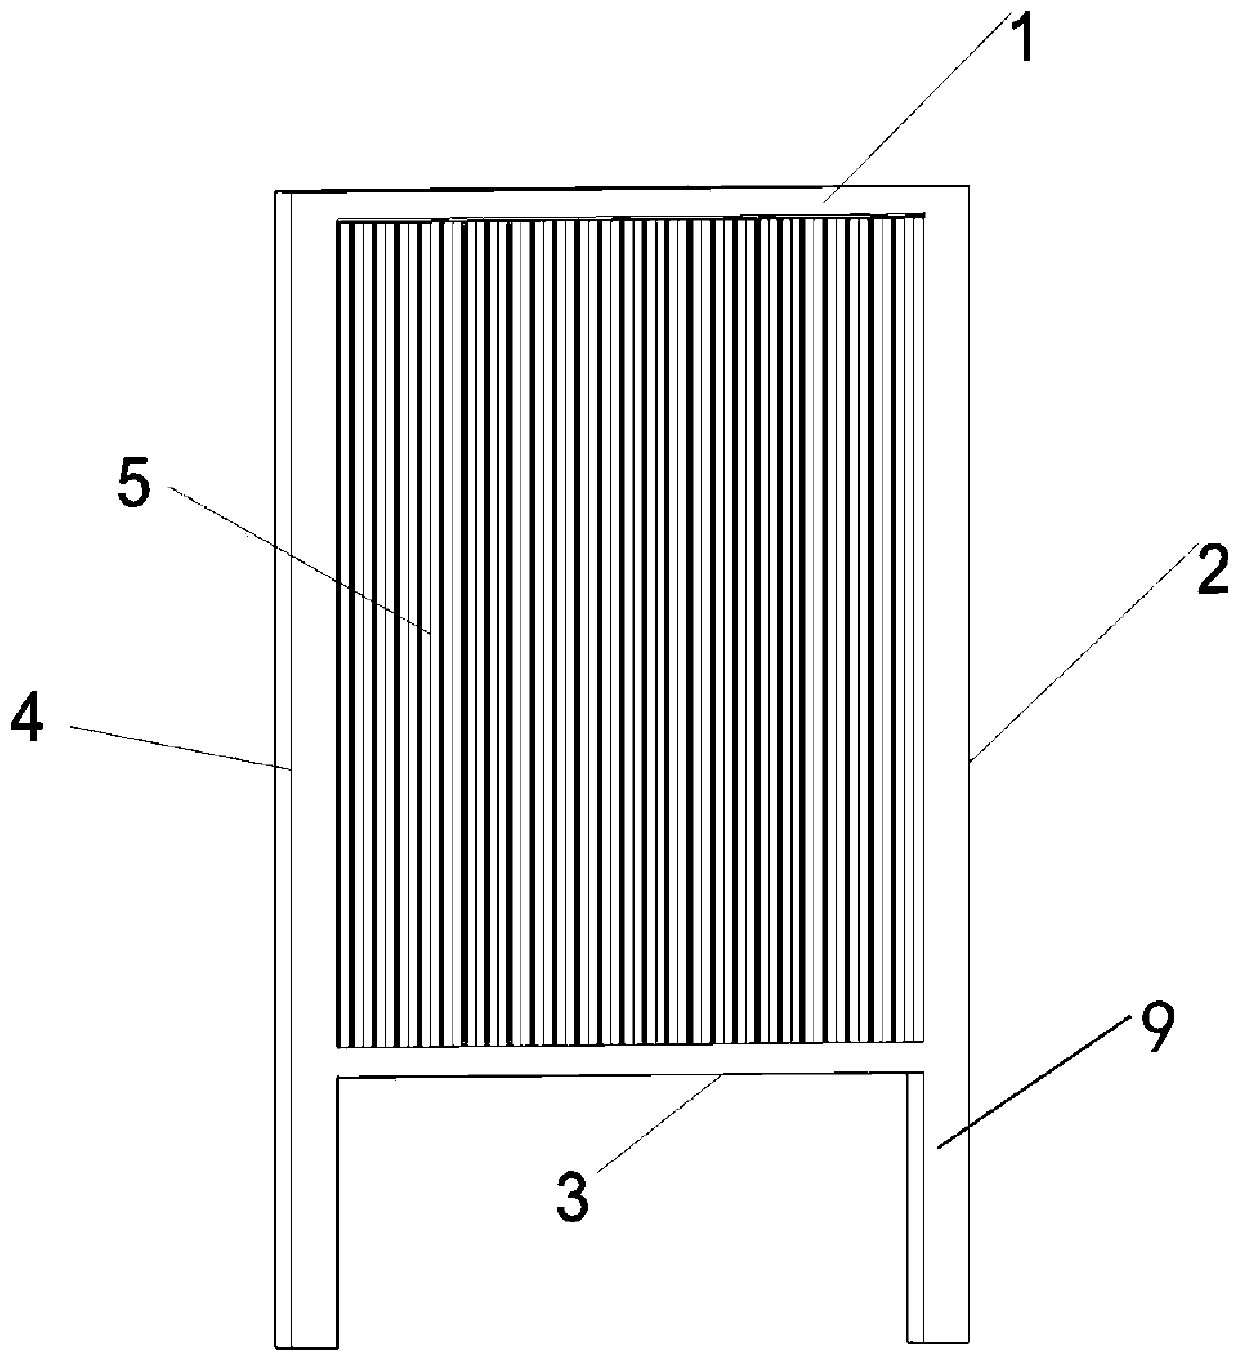 Staggered wind-shield walls capable of controlling wind speed